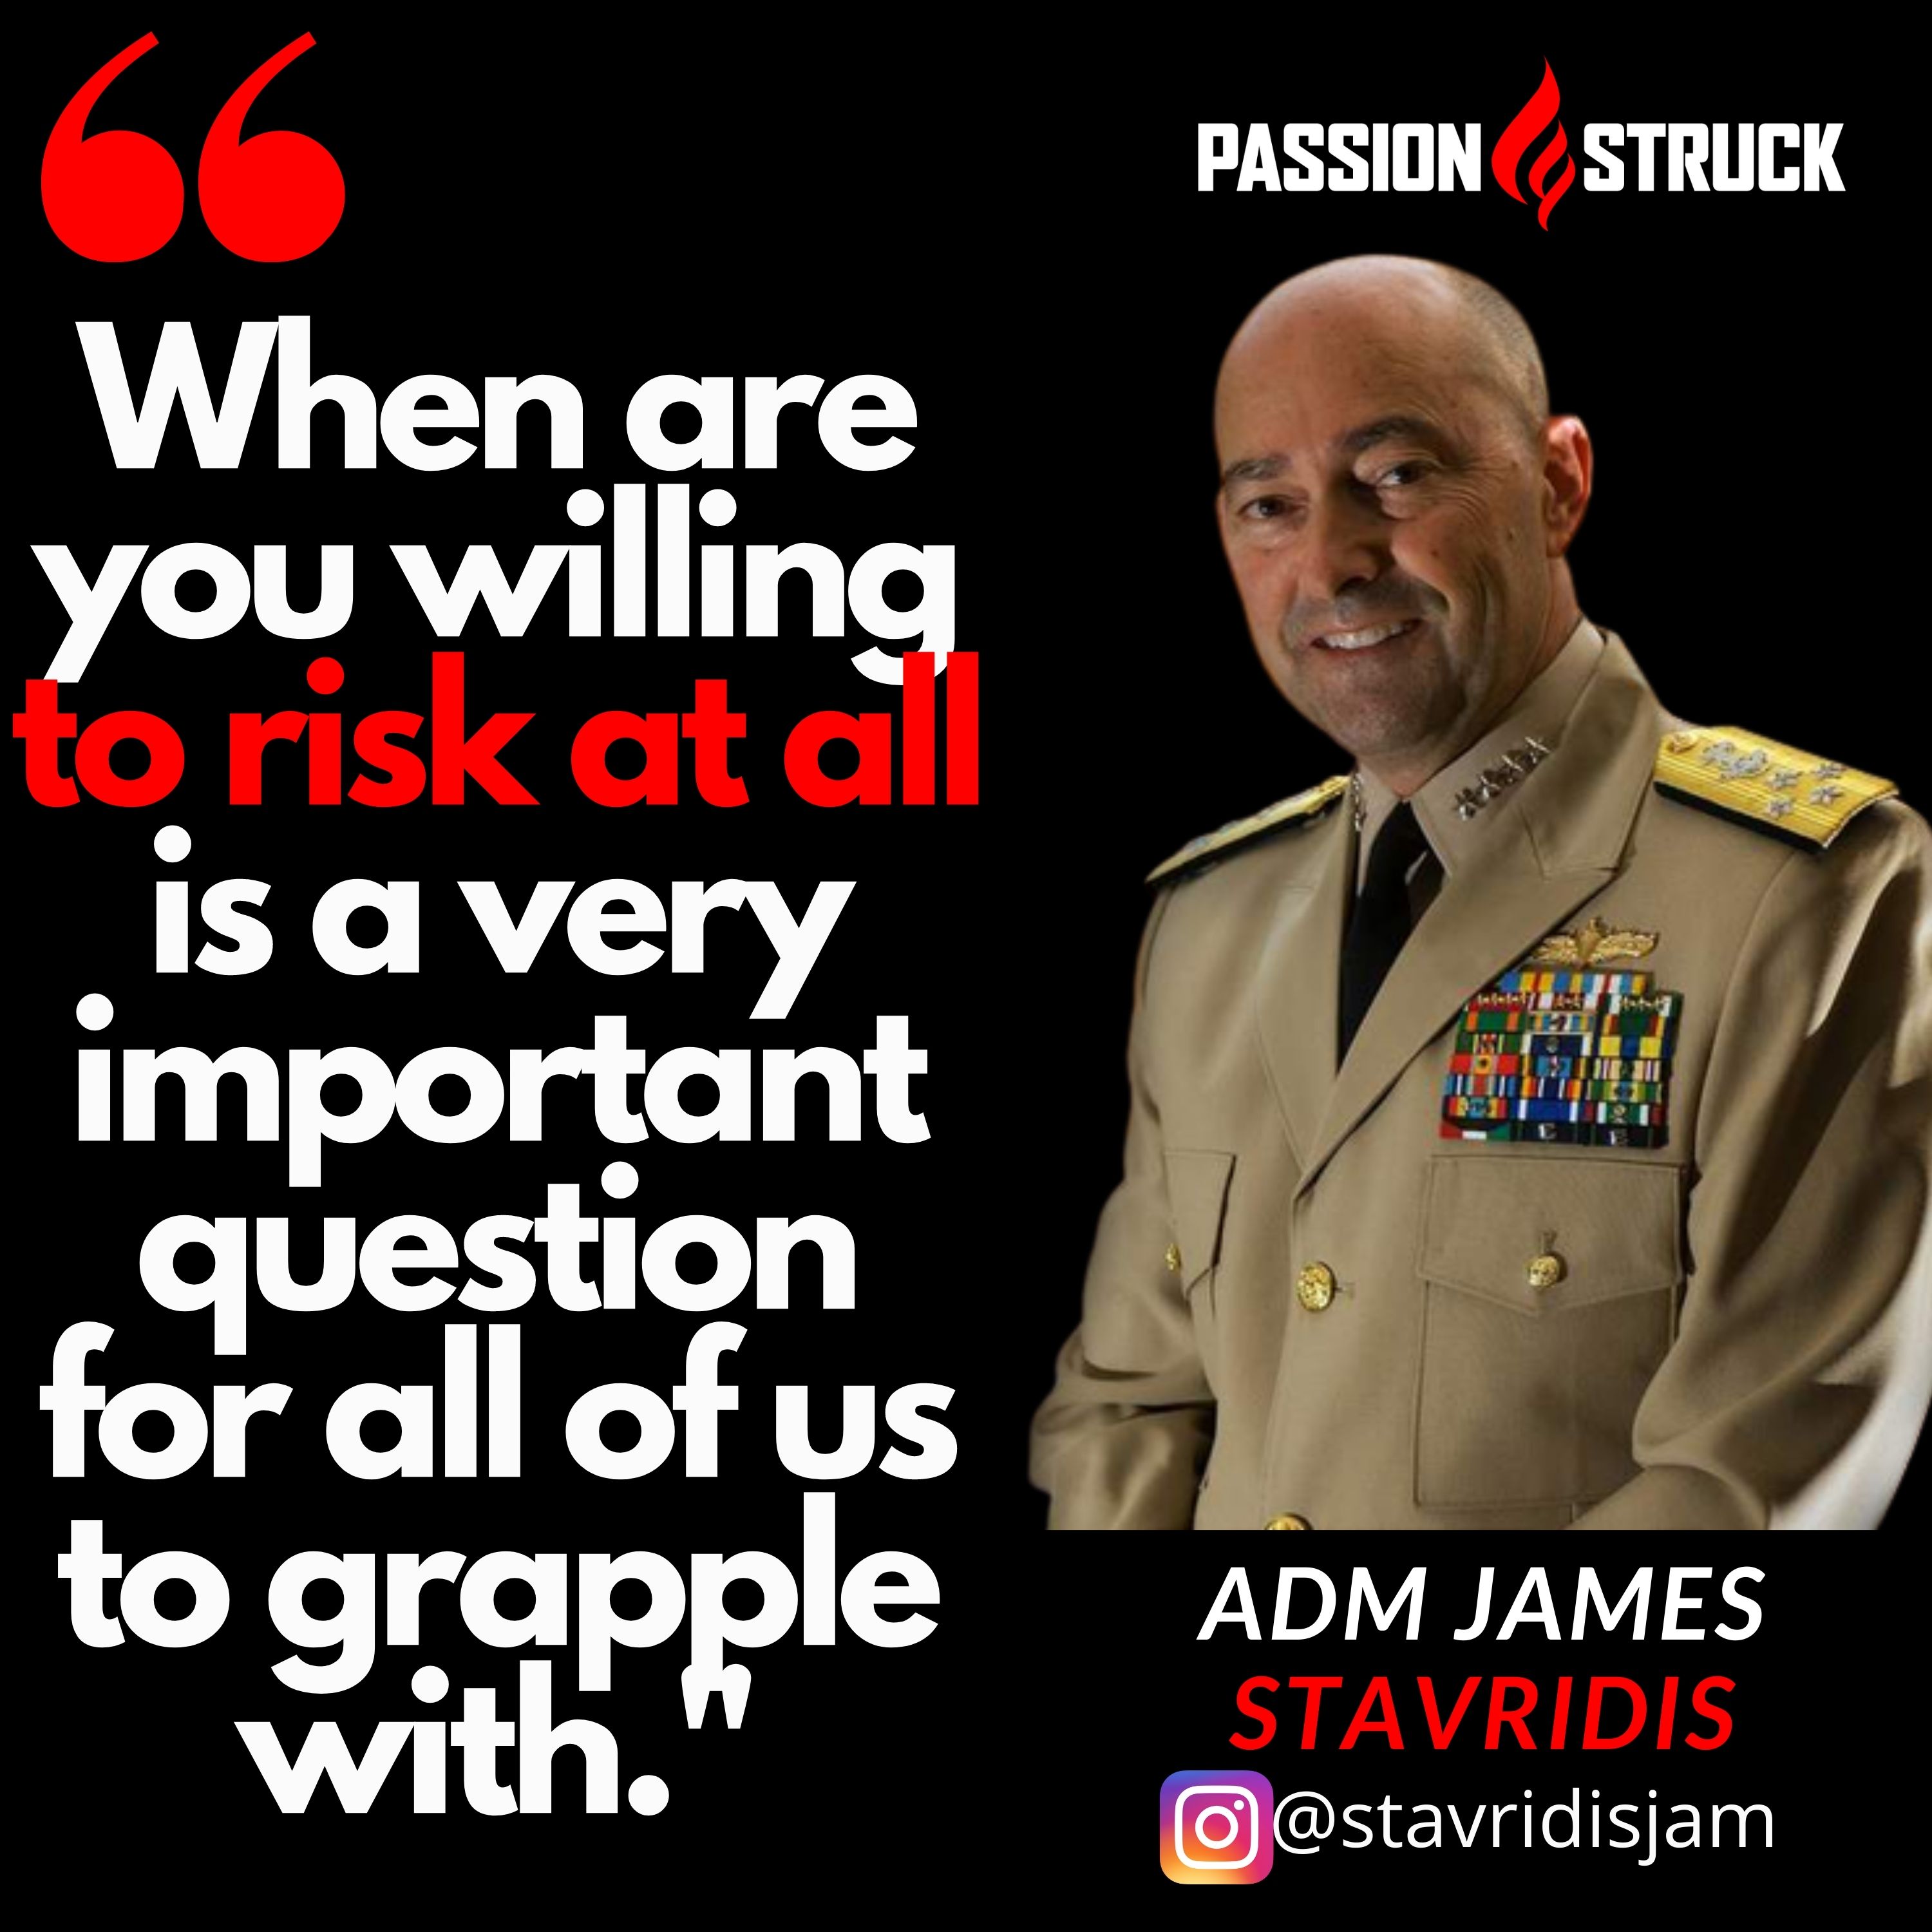 Admiral James Stavridis quote on to risk it all for passion struck